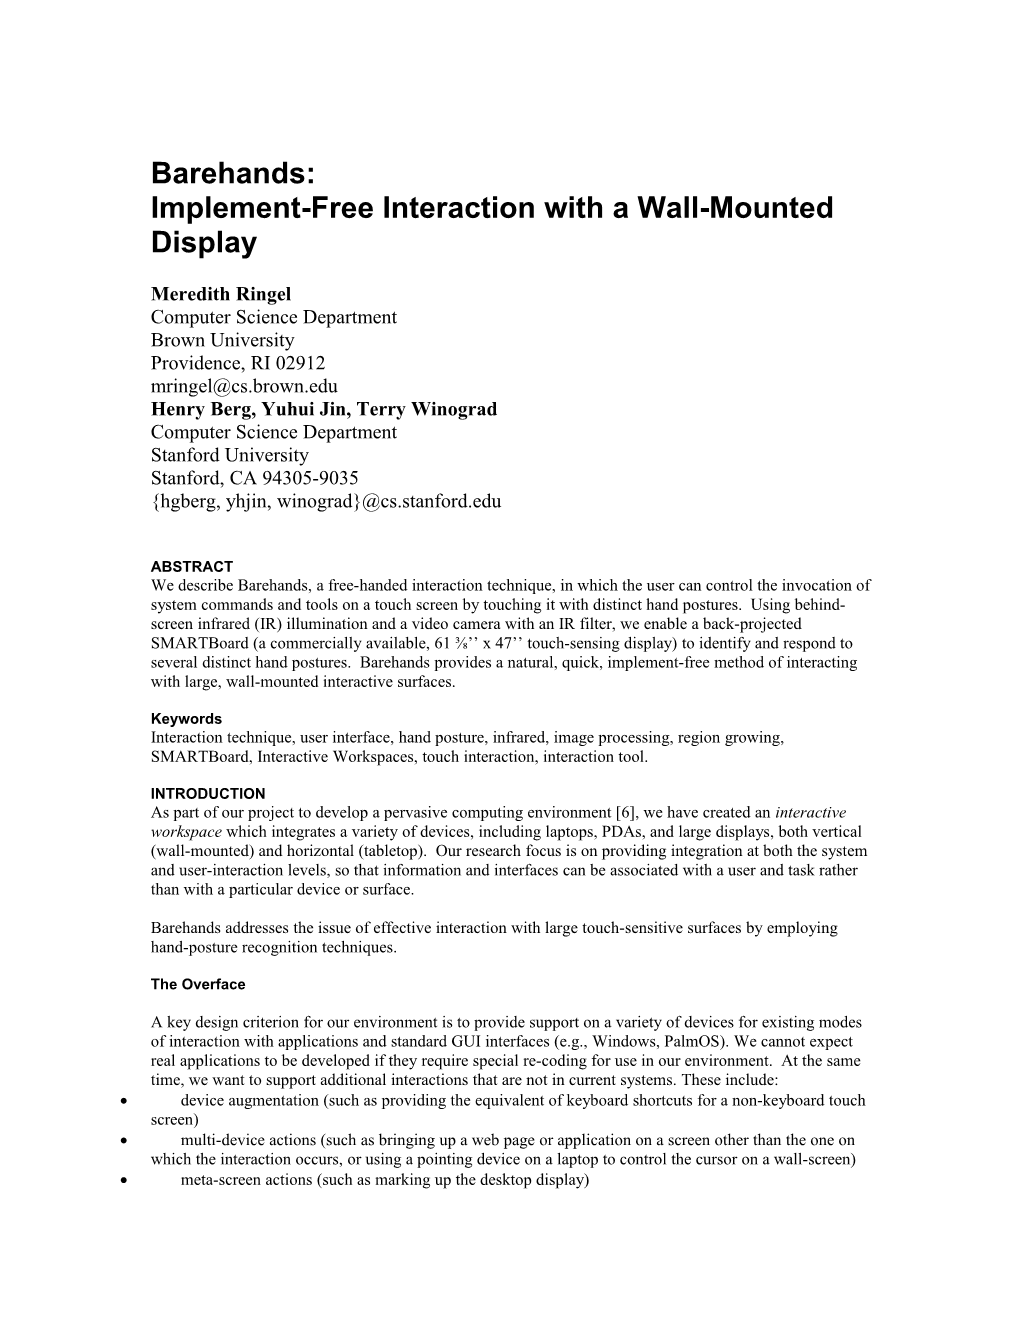 Implement-Free Interaction with a Wall-Mounted Display